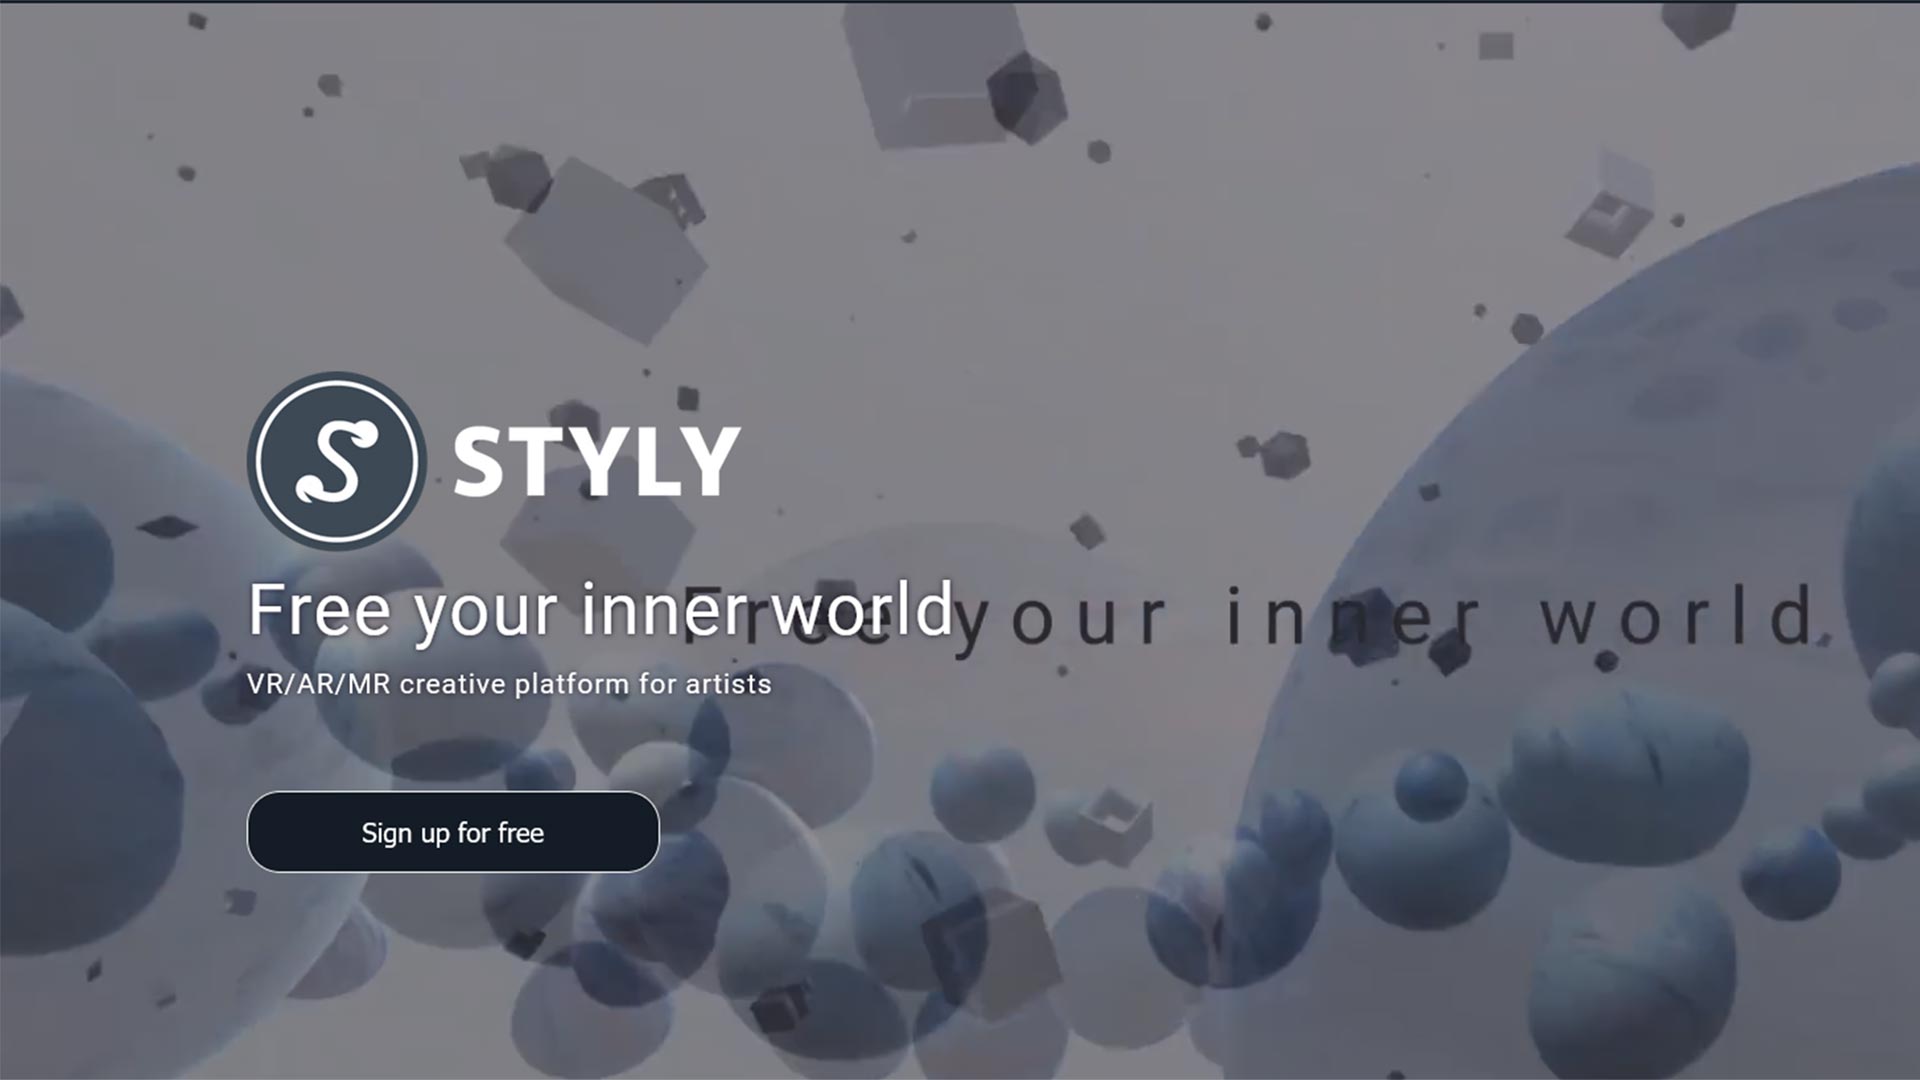 STYLY makes creation and distribution of cross-platform XR content easy